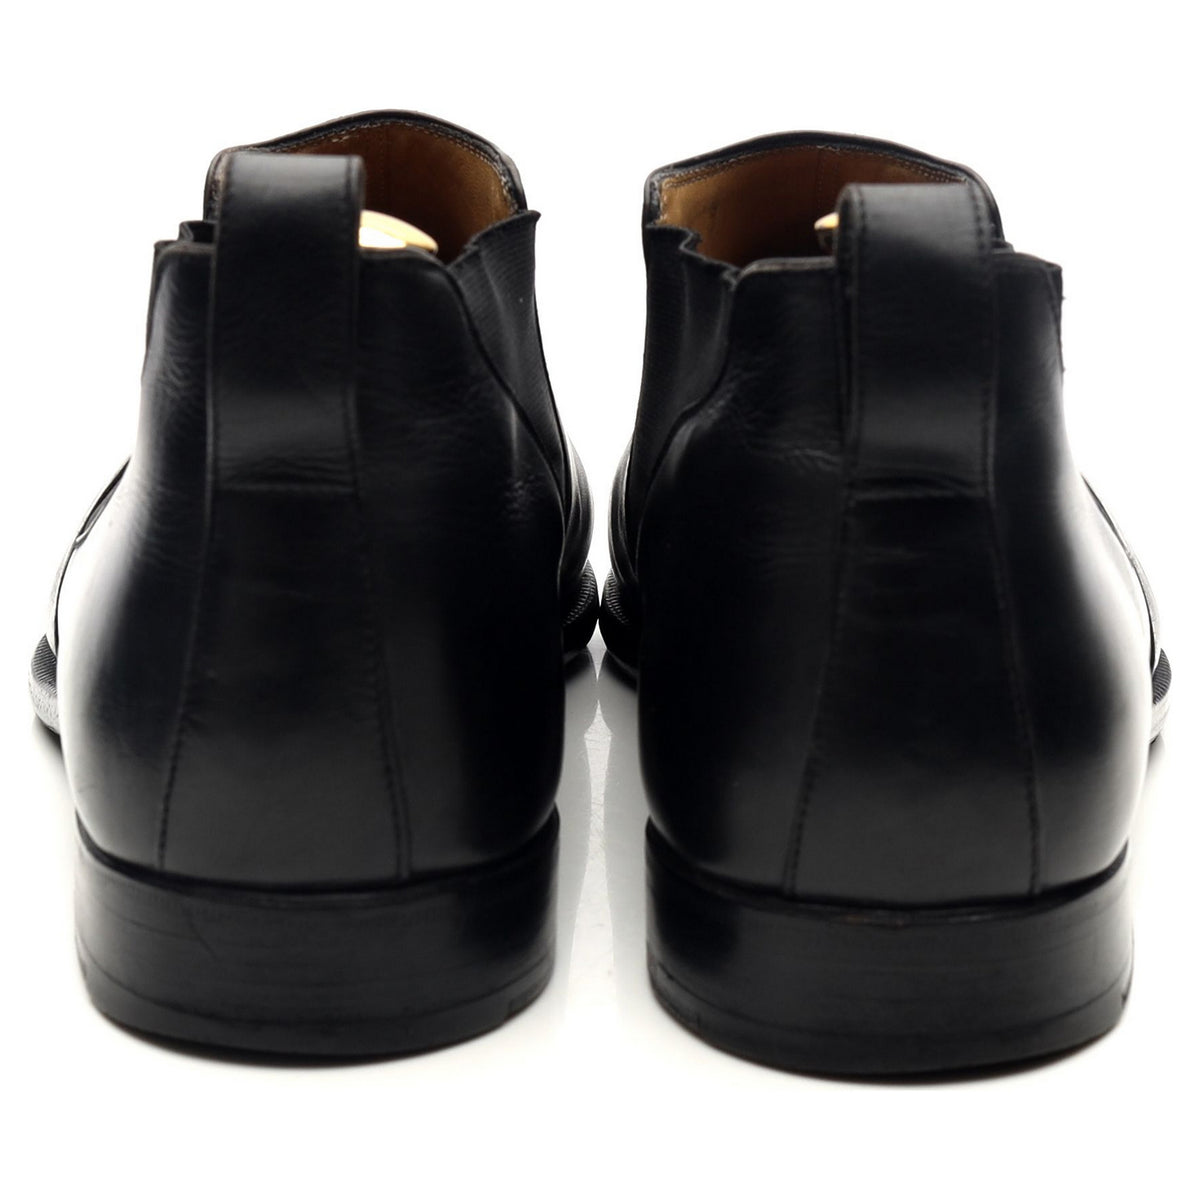 Black Leather Low Chelsea Boots UK 9.5